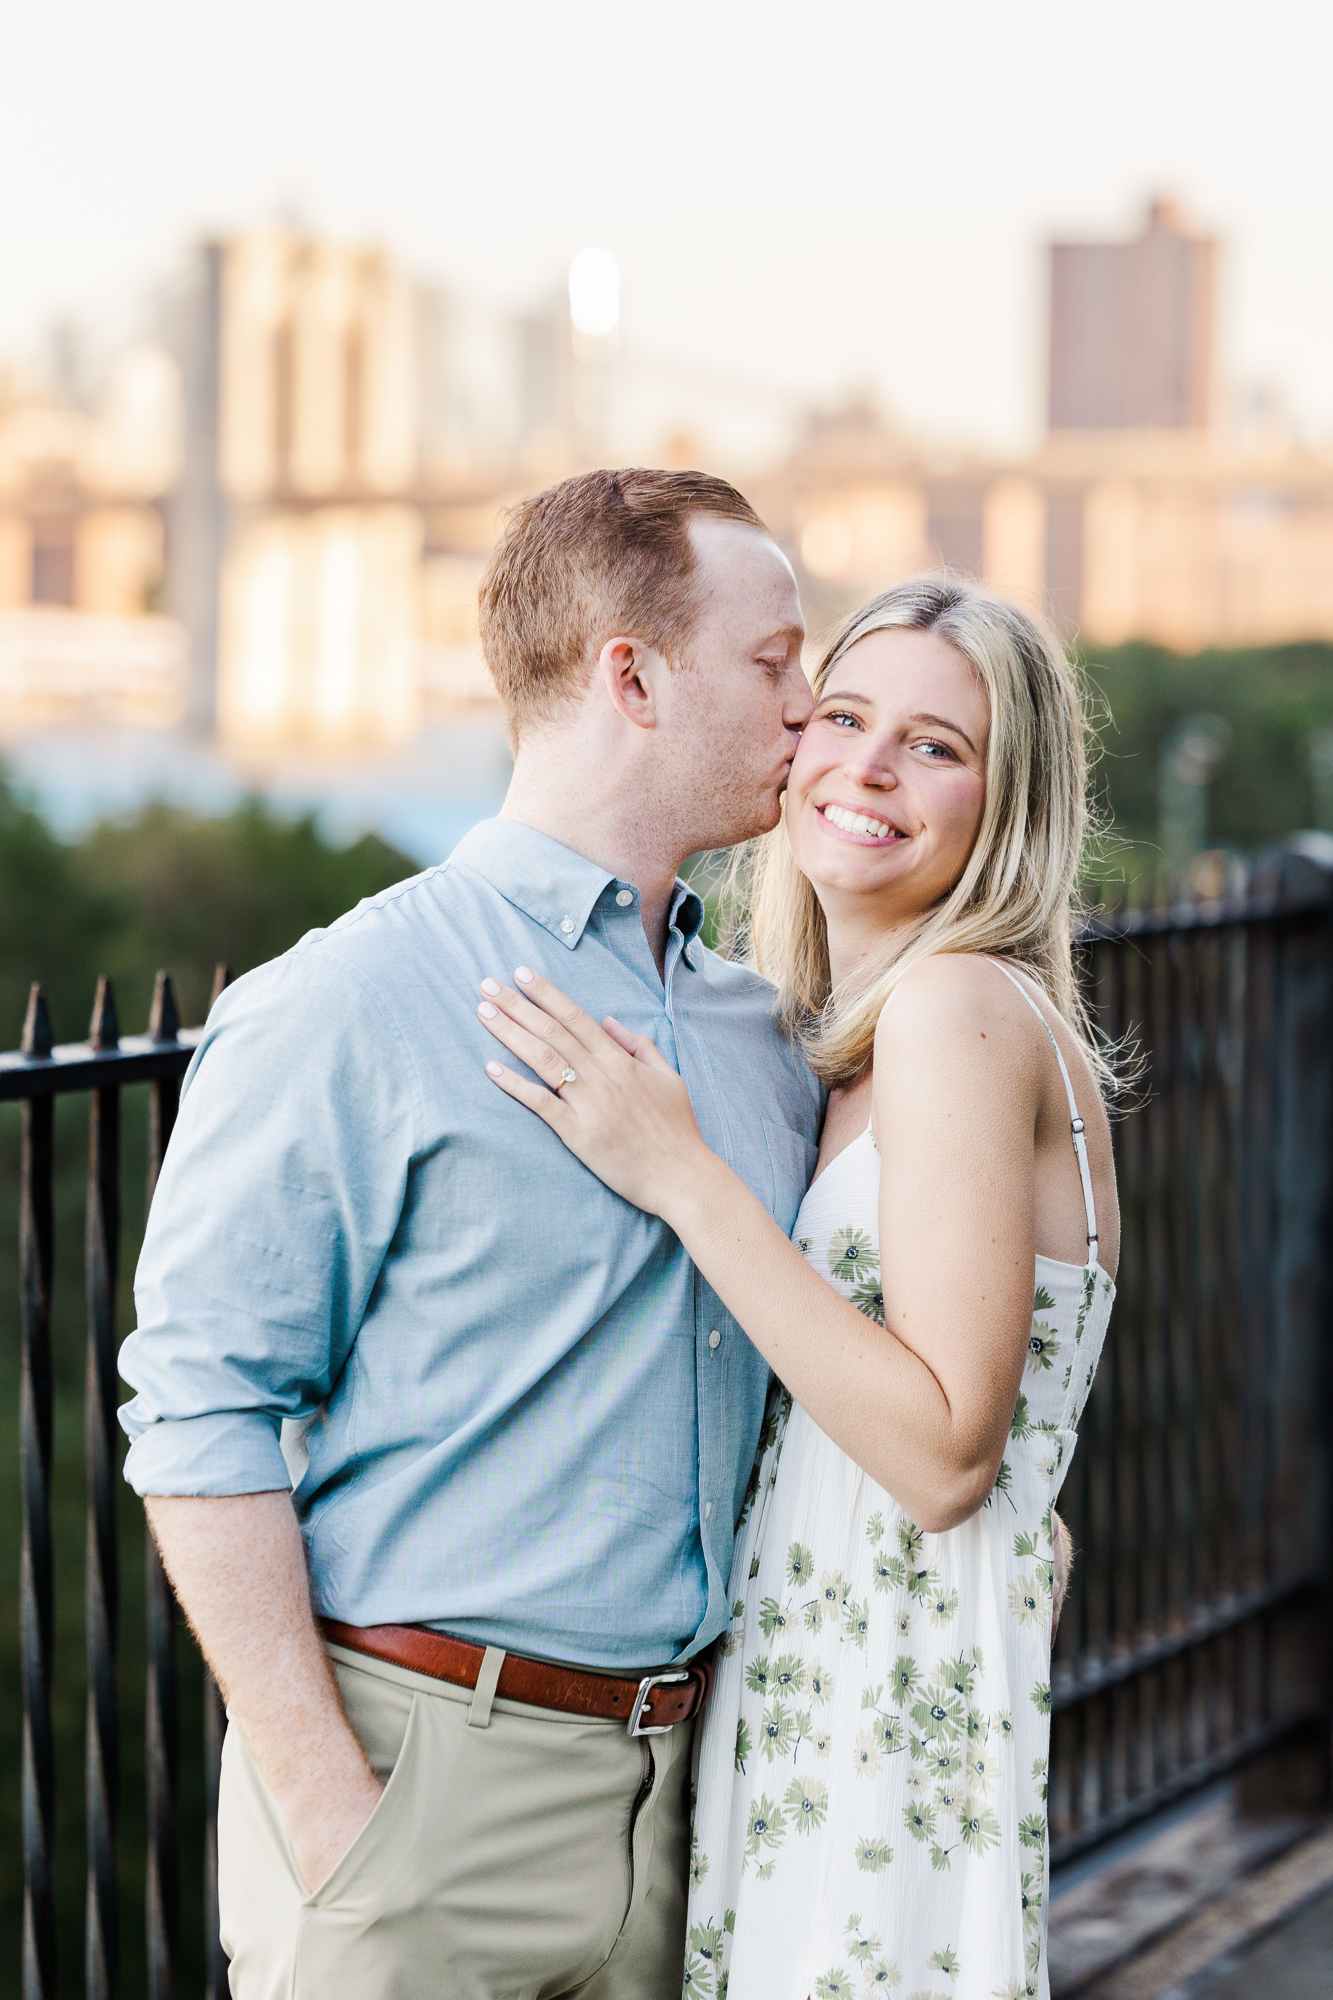 Cute Engagement Photos In Brooklyn Heights